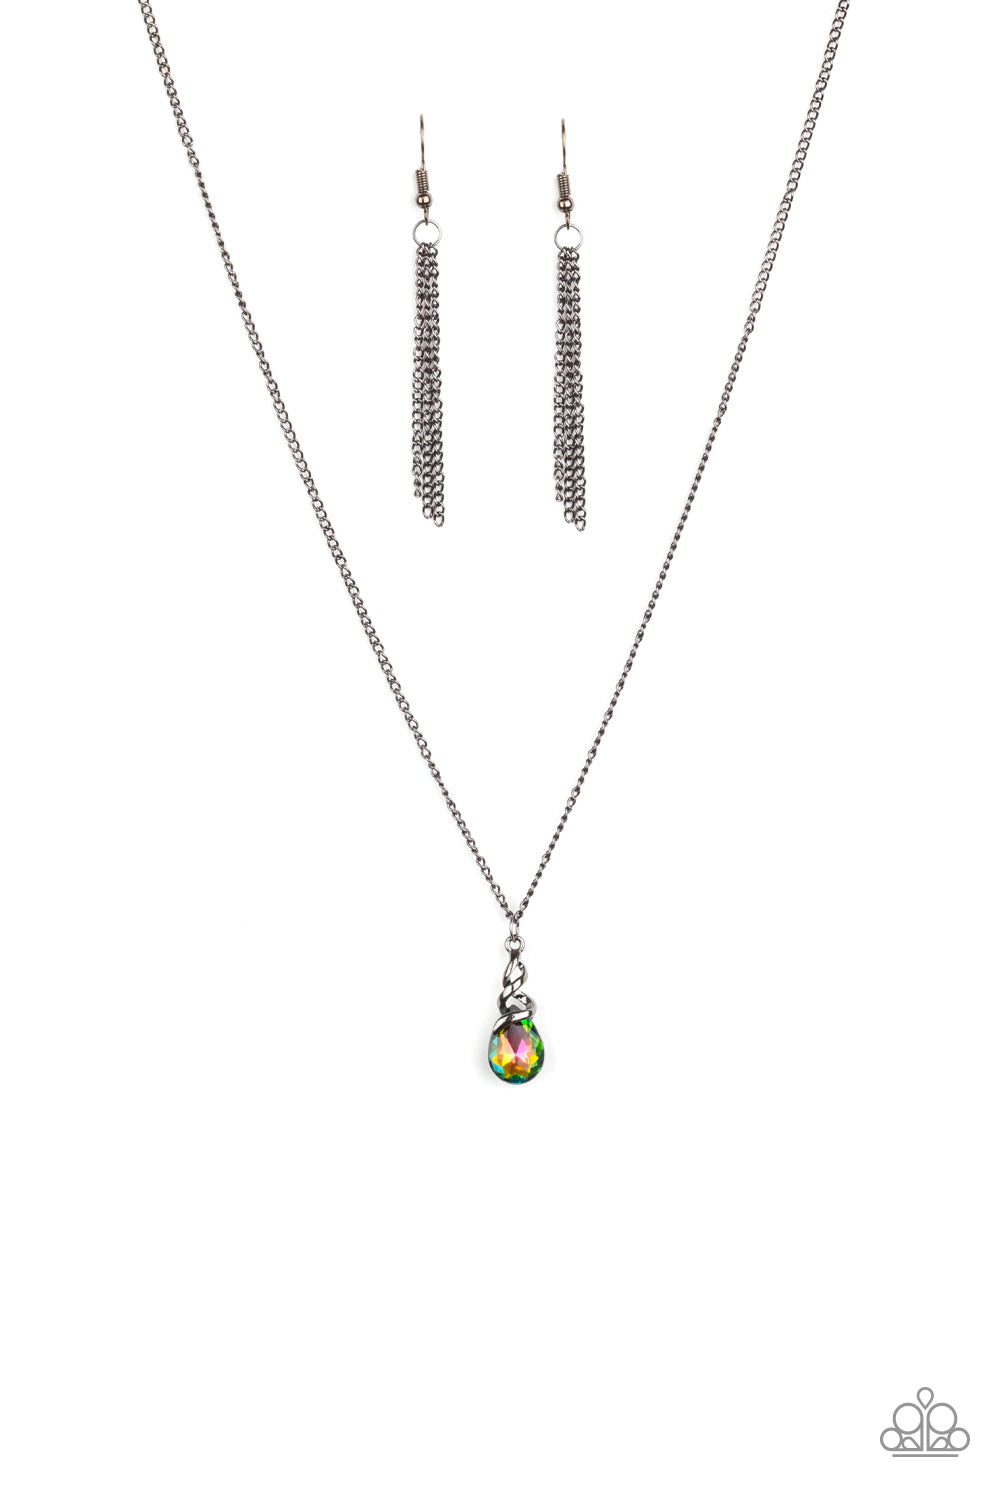 Paparazzi Accessories Timeless Trinket - Multi Necklace & Earrings 